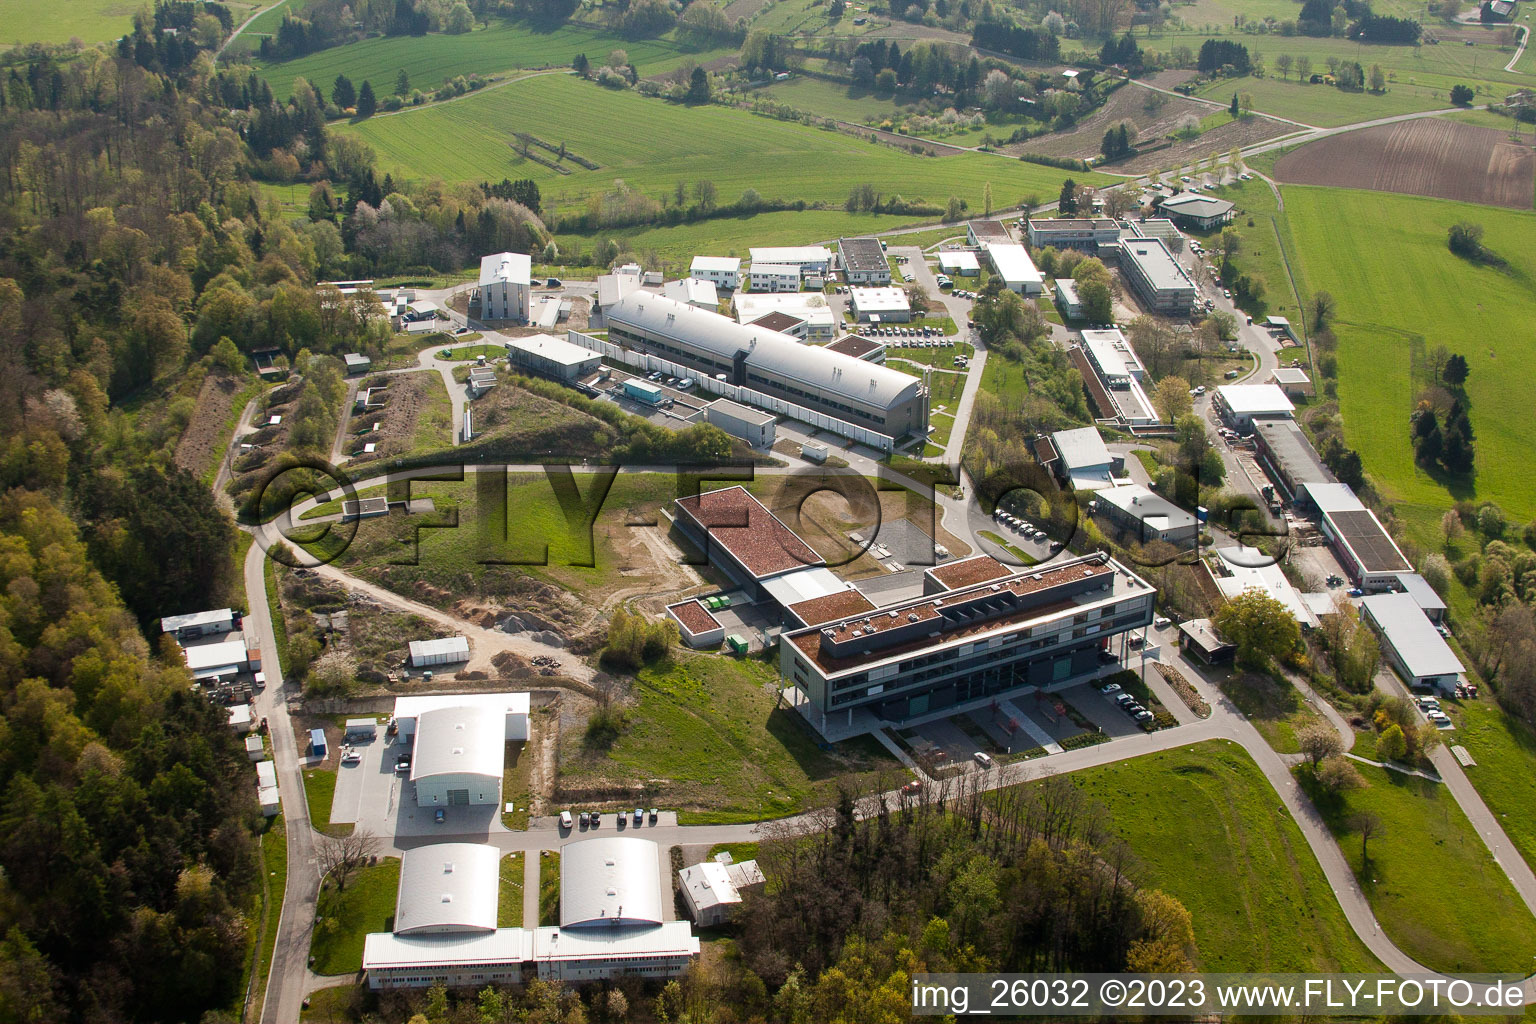 Pfinztal, Fraunhofer Institute for Chemical Technology (ICT) from the west in the district Grötzingen in Karlsruhe in the state Baden-Wuerttemberg, Germany